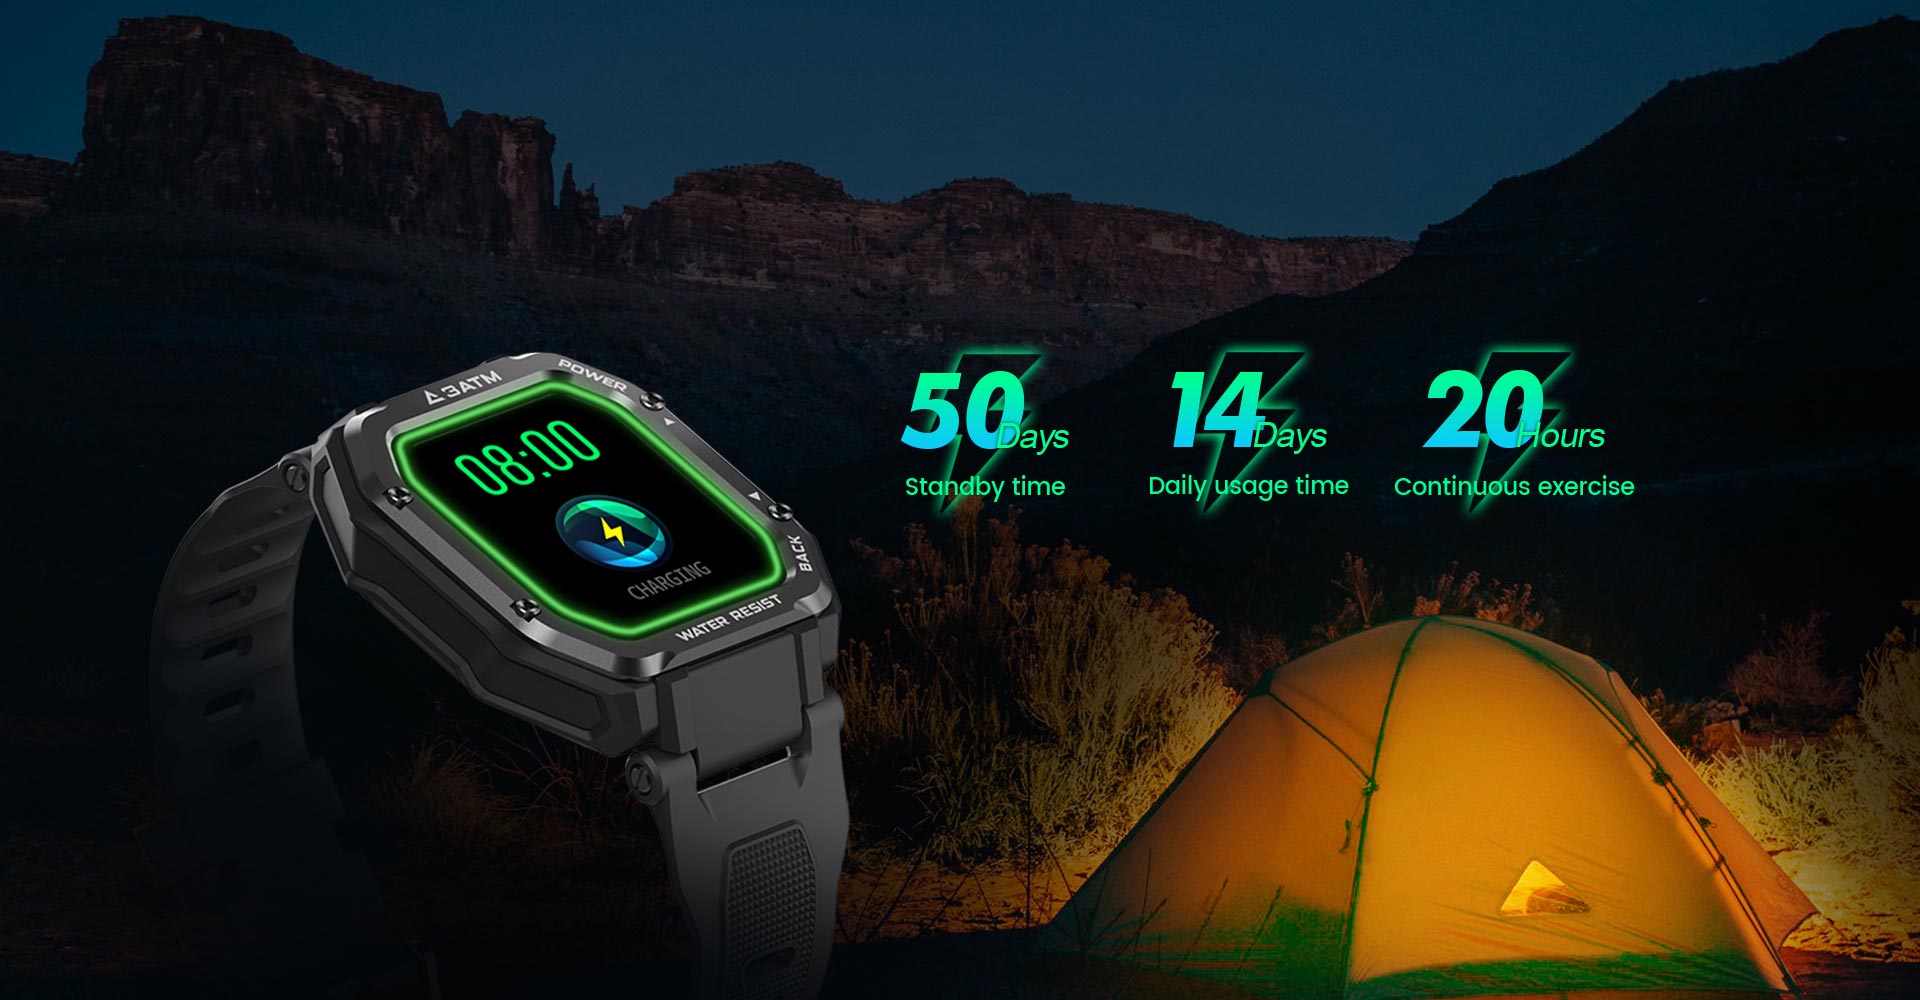 KOSPET ROCK Rugged Smartwatch, with 350mAh Battery